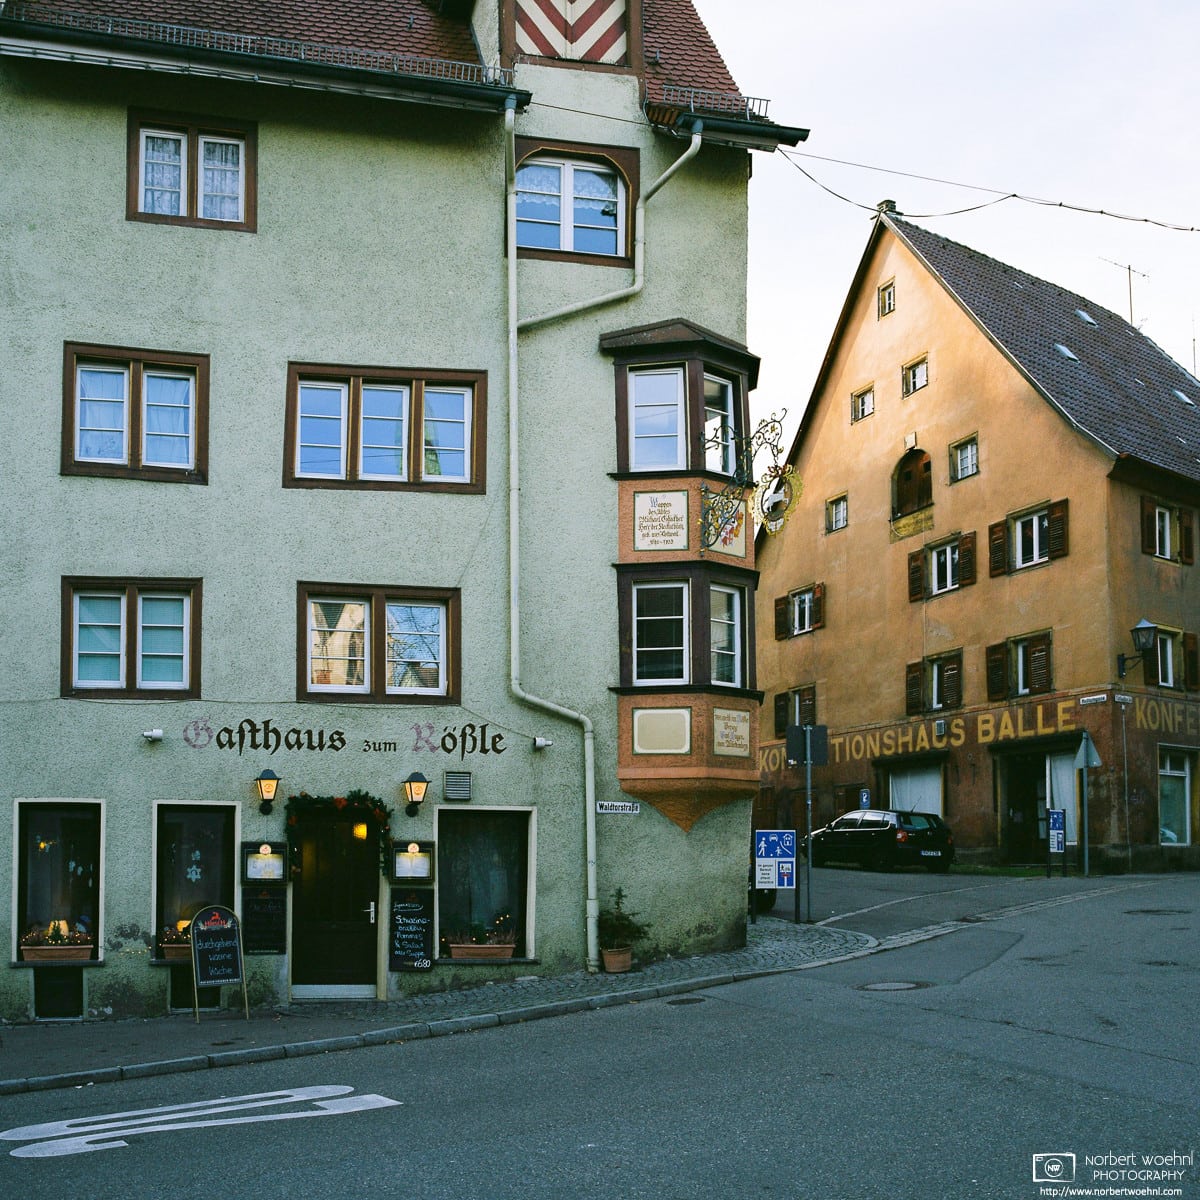 A photo of the "Rößle" in Rottweil, Germany - this building has been home to a restaurant since the late 17th century.